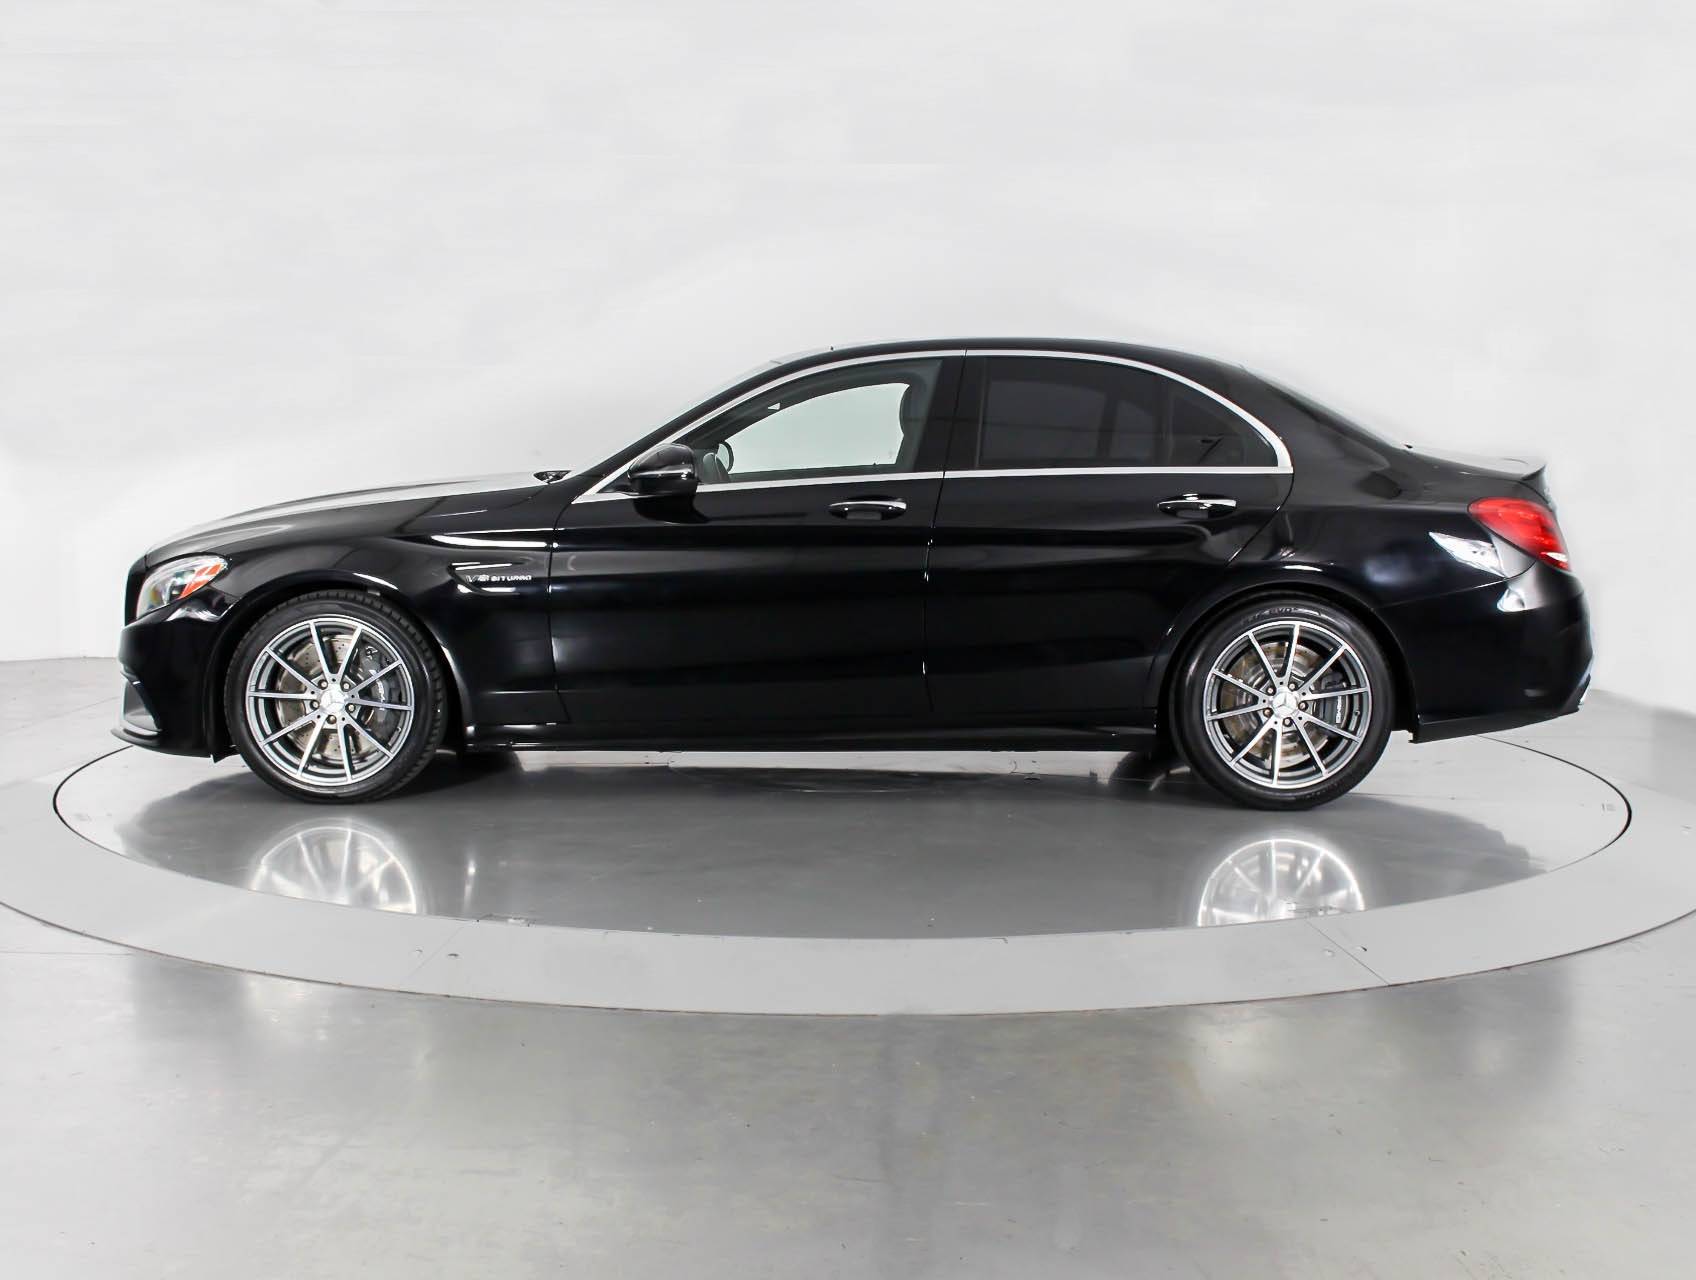 Used 16 Mercedes Benz C Class C63 Amg Sedan For Sale In West Palm Fl 653 Florida Fine Cars